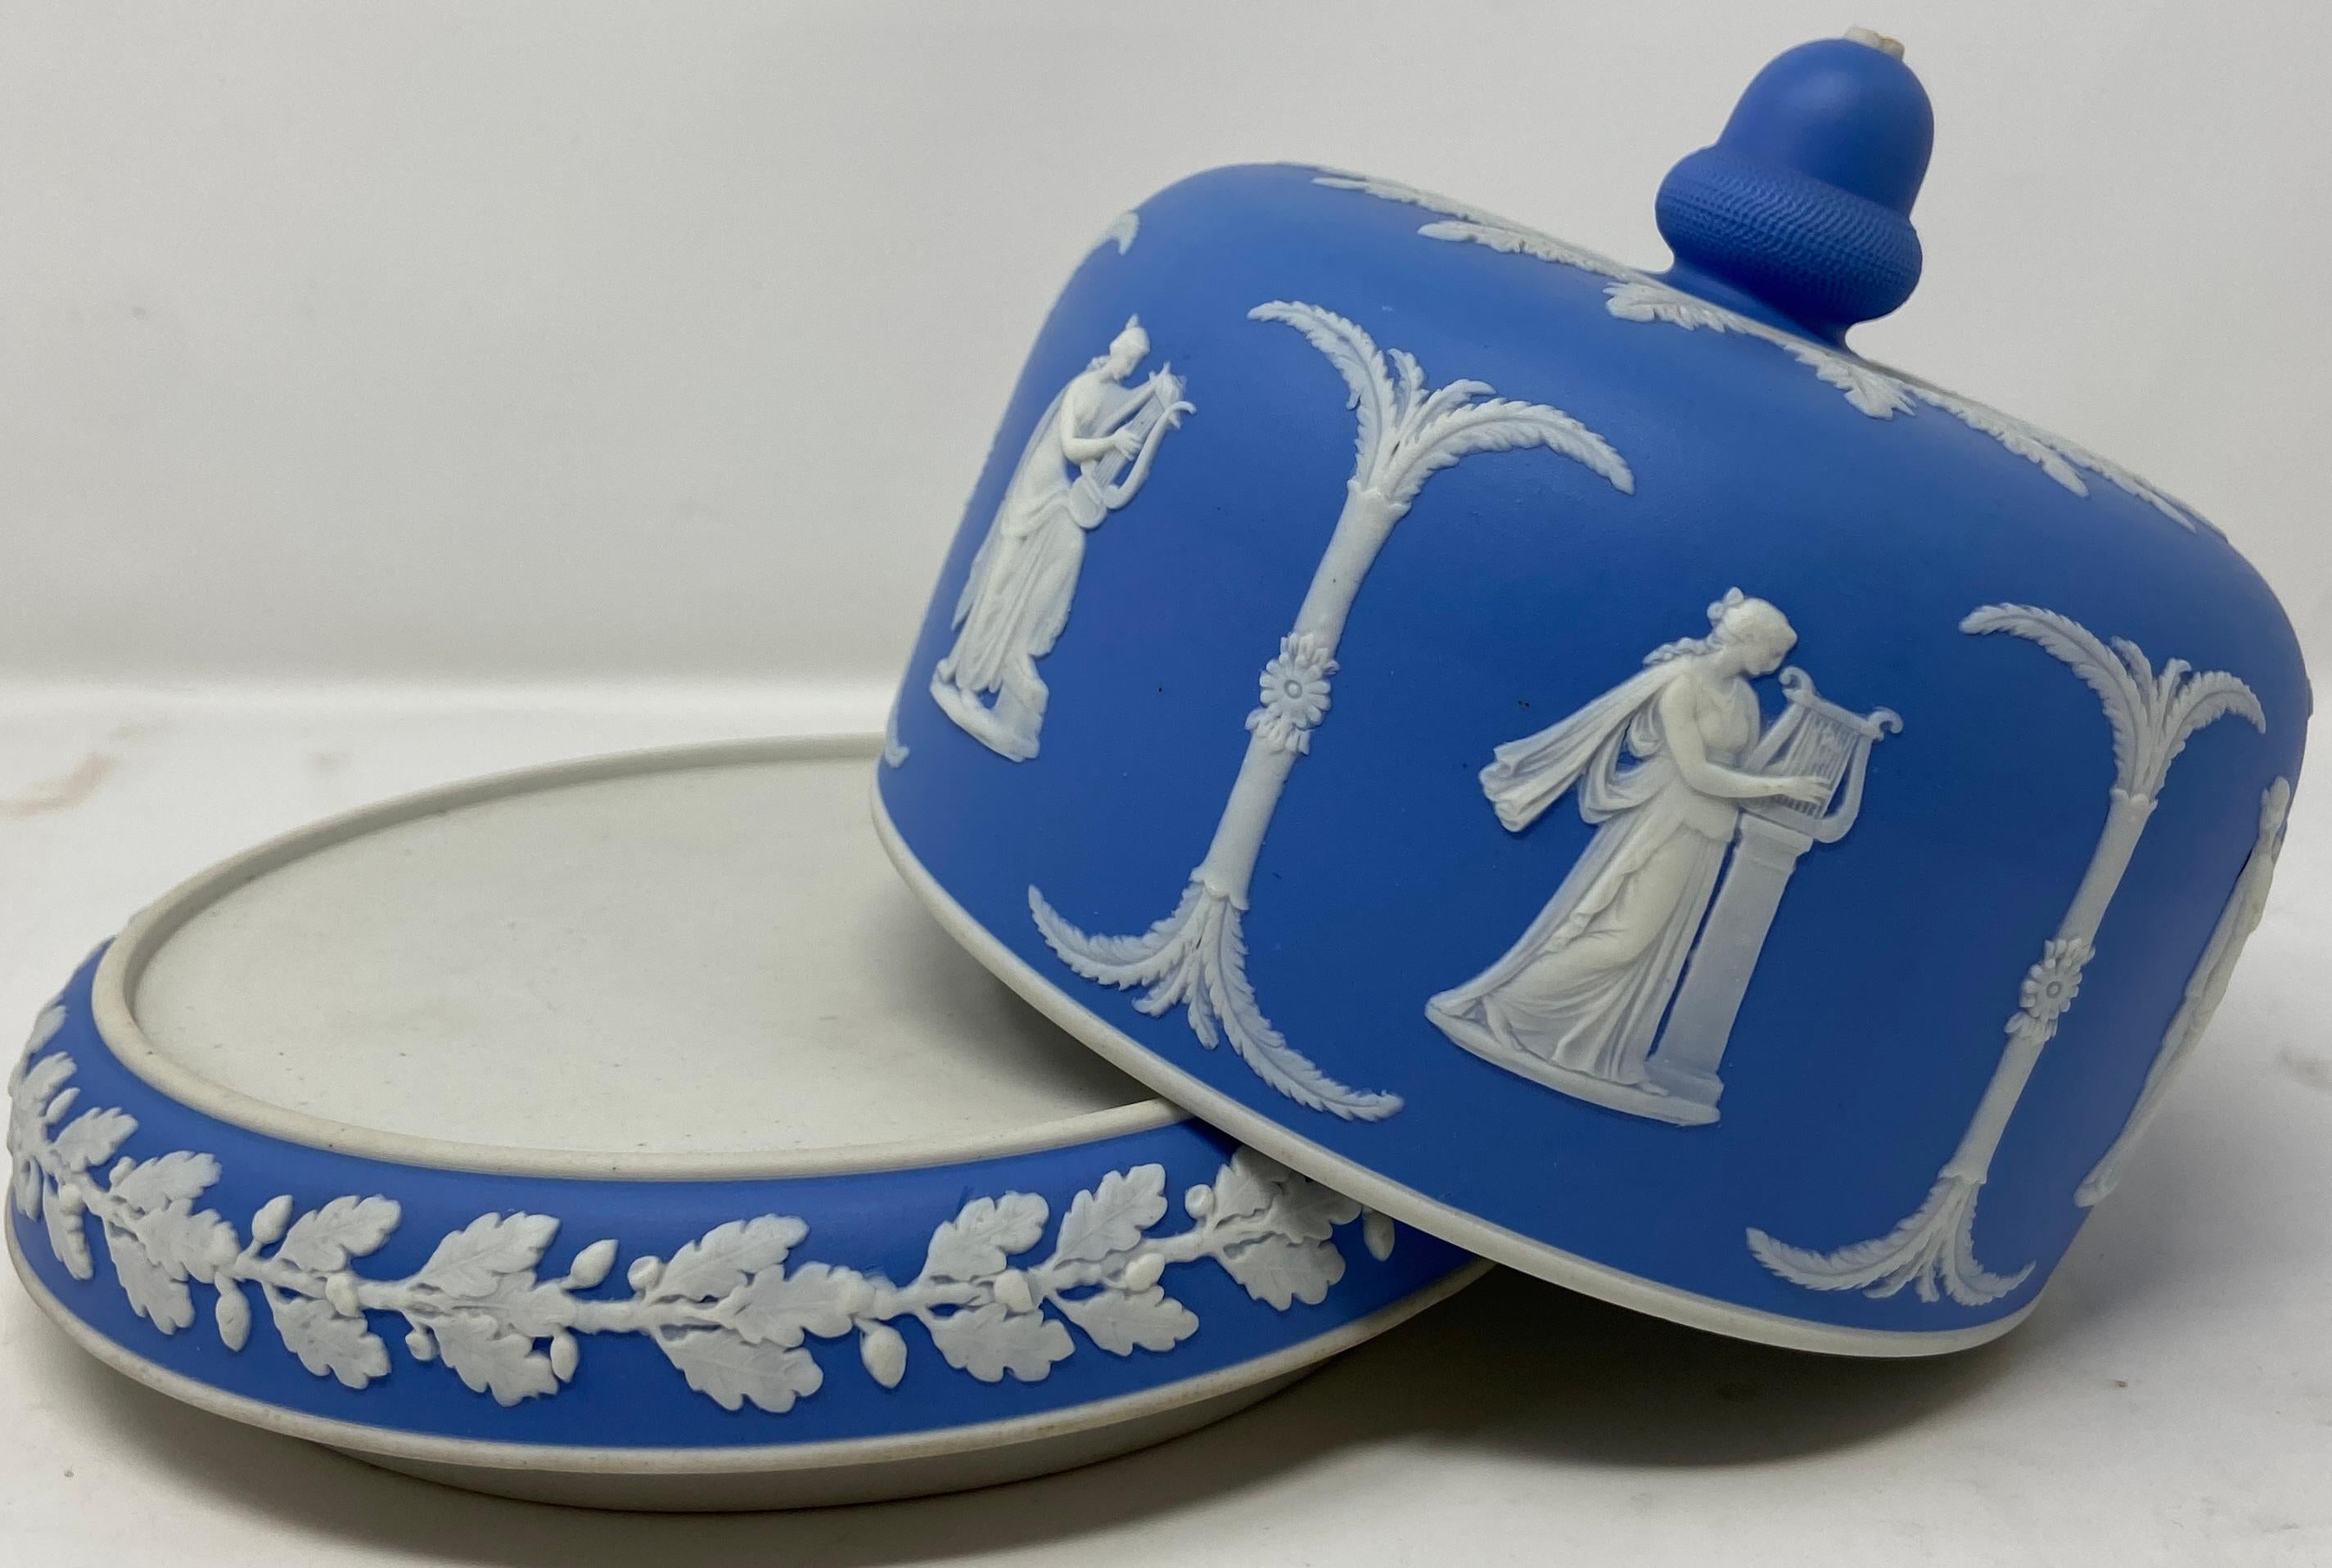 19th Century Antique English Wedgwood Blue & White Porcelain Cheese Dish and Cover Circa 1900